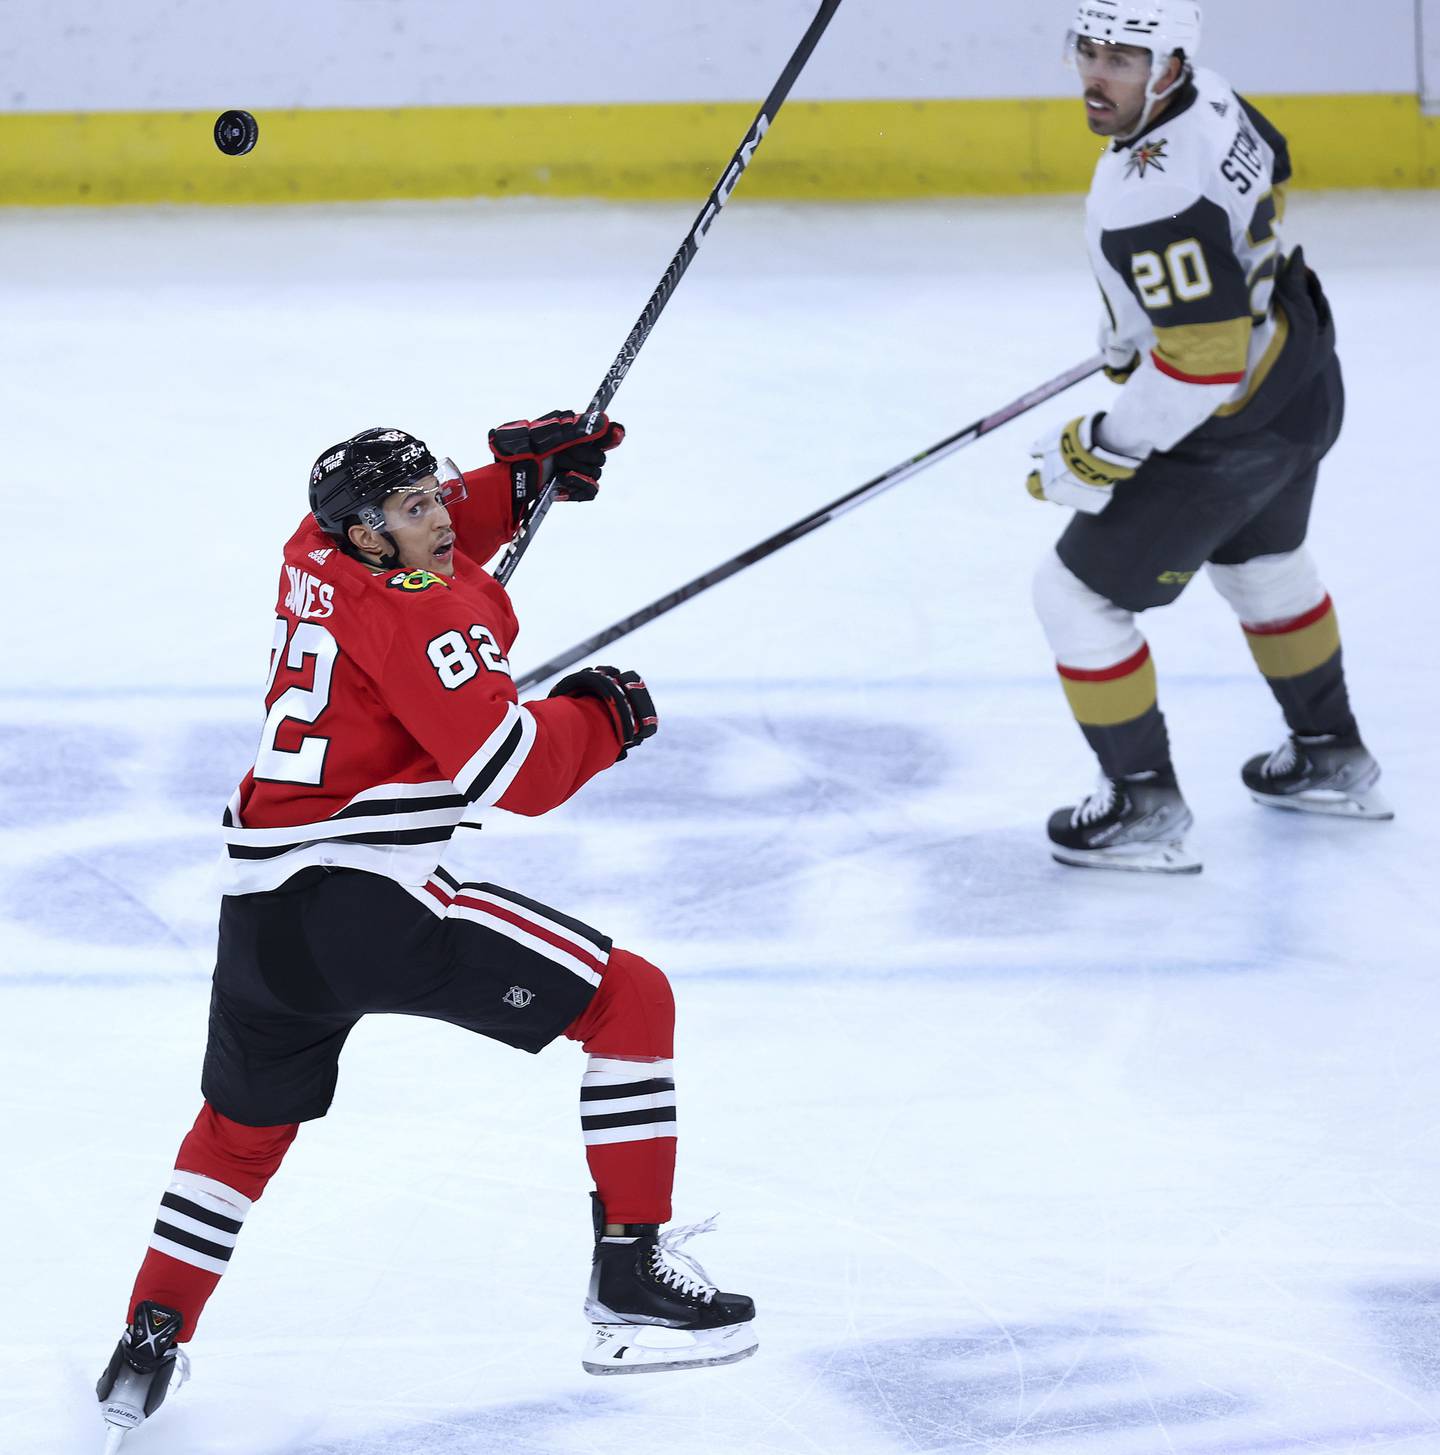 Blackhawks defenseman Caleb Jones keeps his eyes on an airborne puck in the second period against the Golden Knights at the United Center on Dec. 15, 2022.